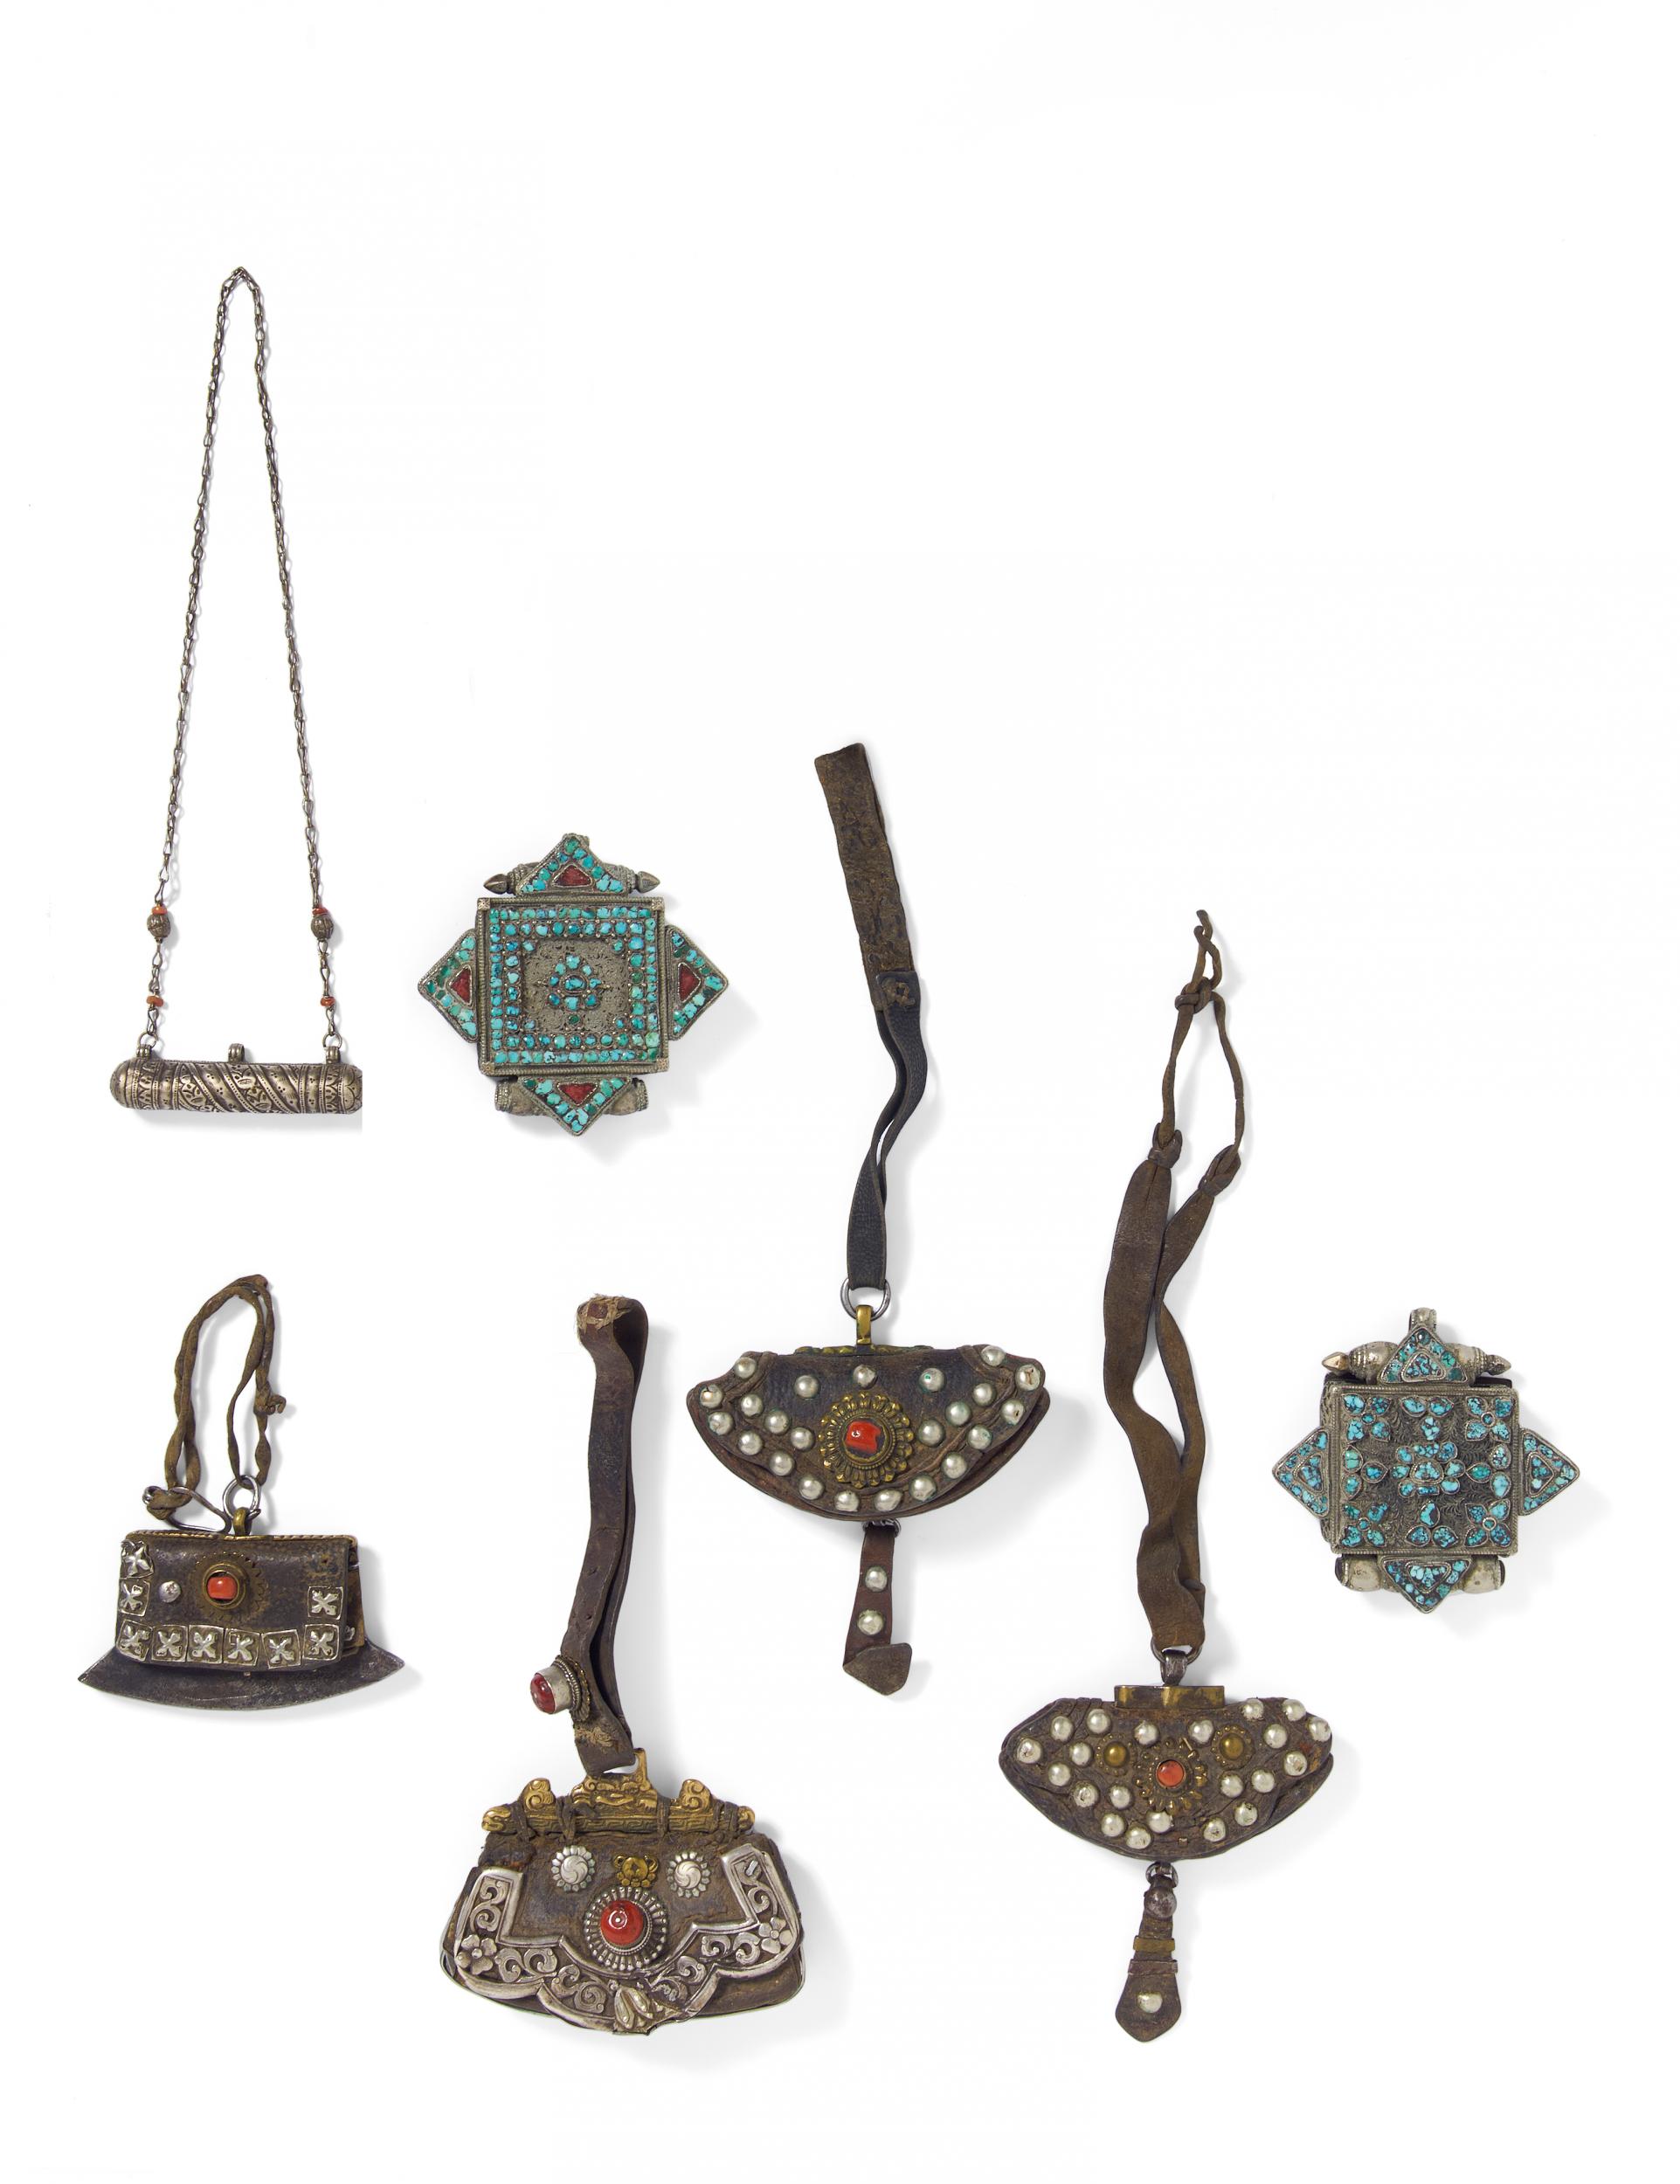 FOUR FIRE MAKING ETUIS AND THREE AMULET BOXES. Tibet. 19th/20th c. Metal, bronze, iron, leather,